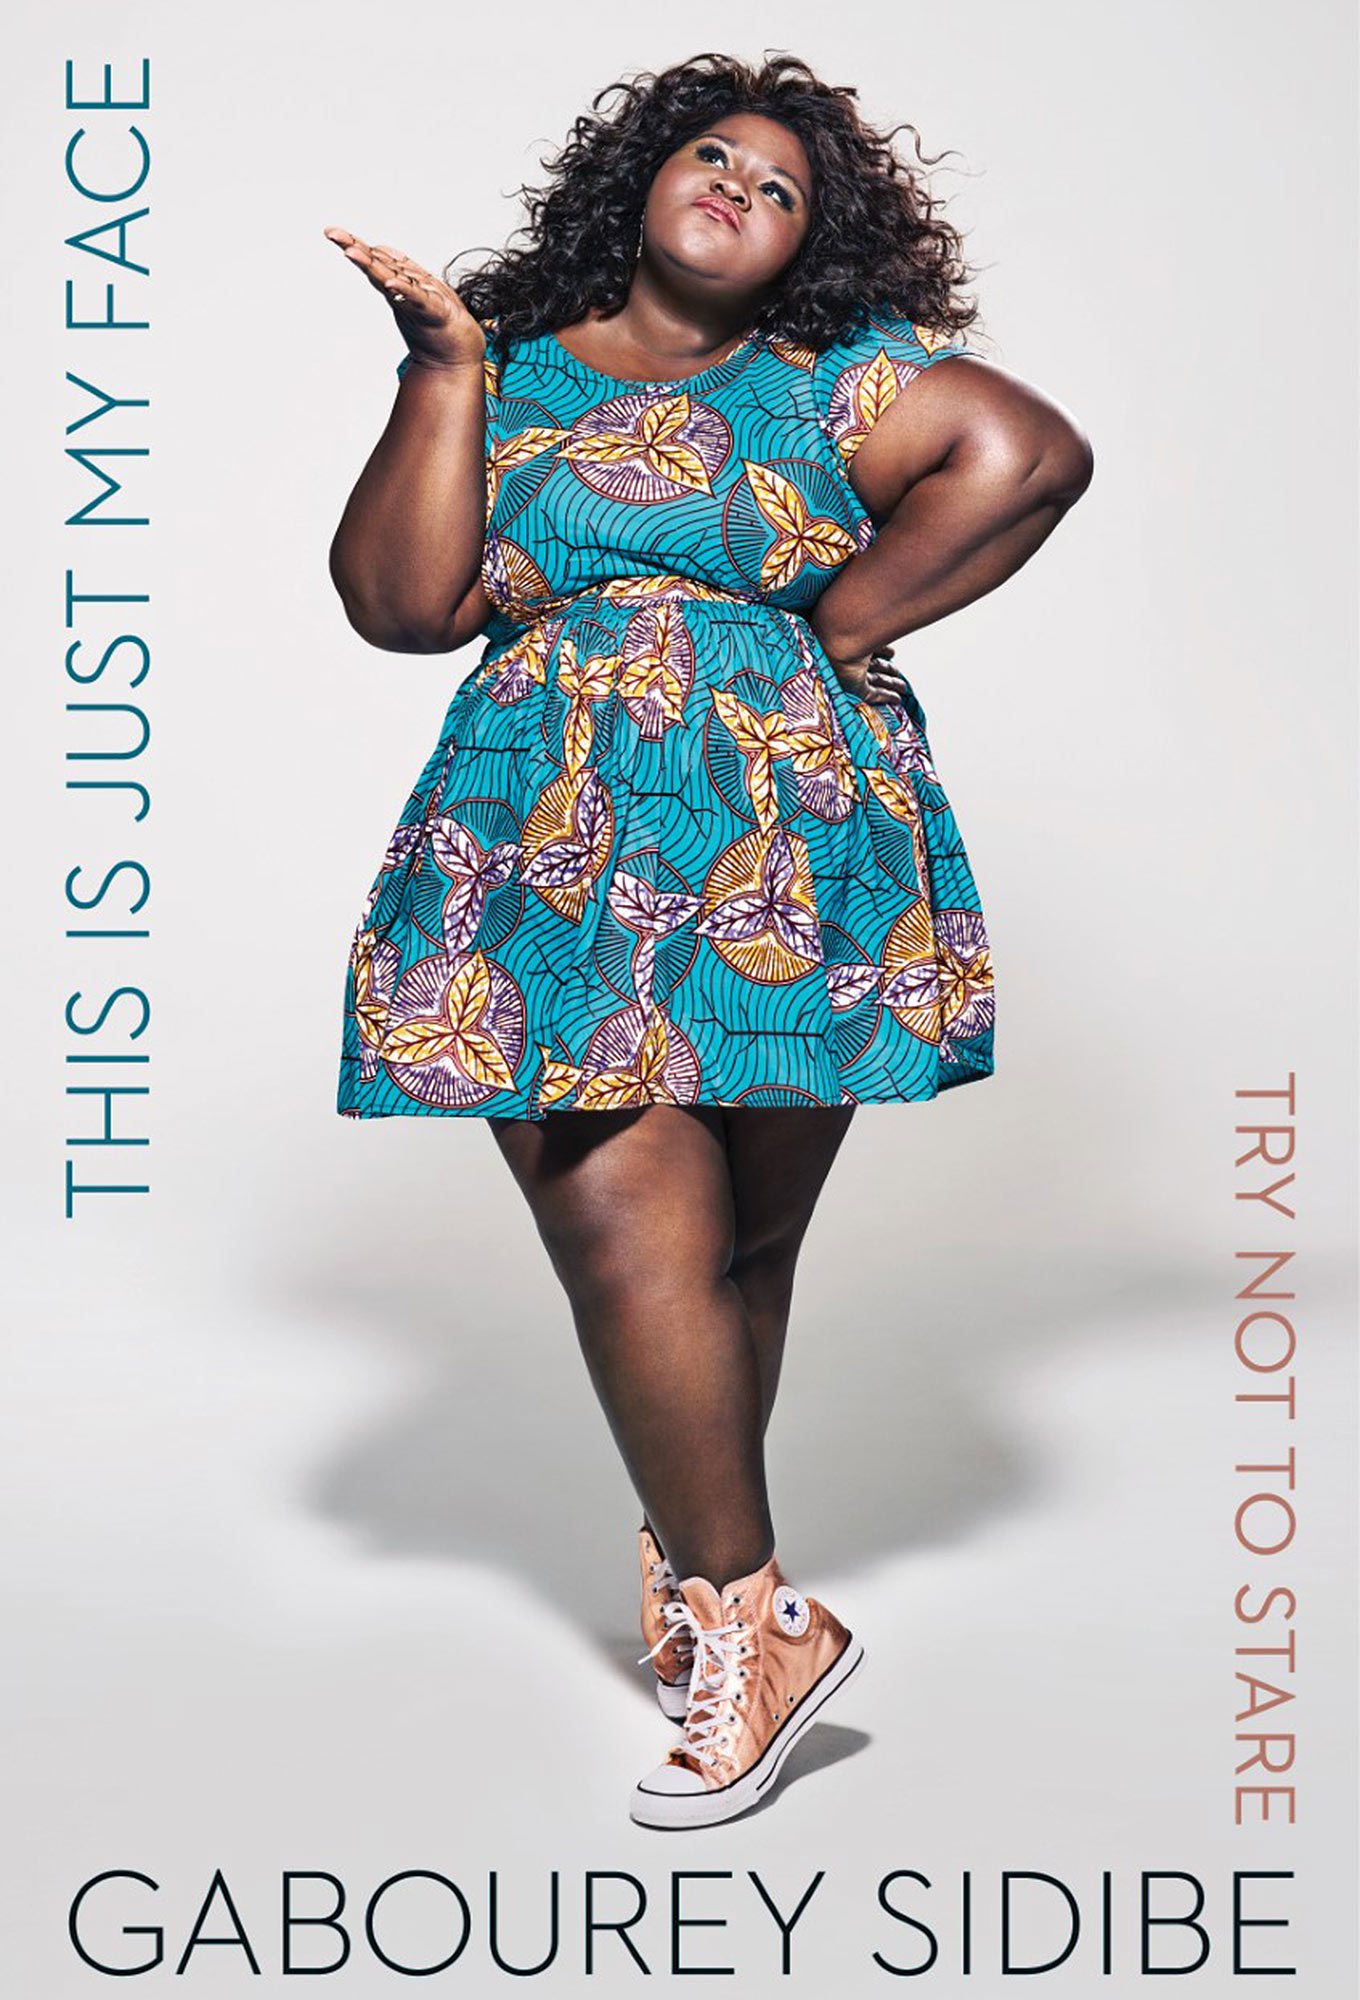 This Is Just My Face by Gabourey Sidibe